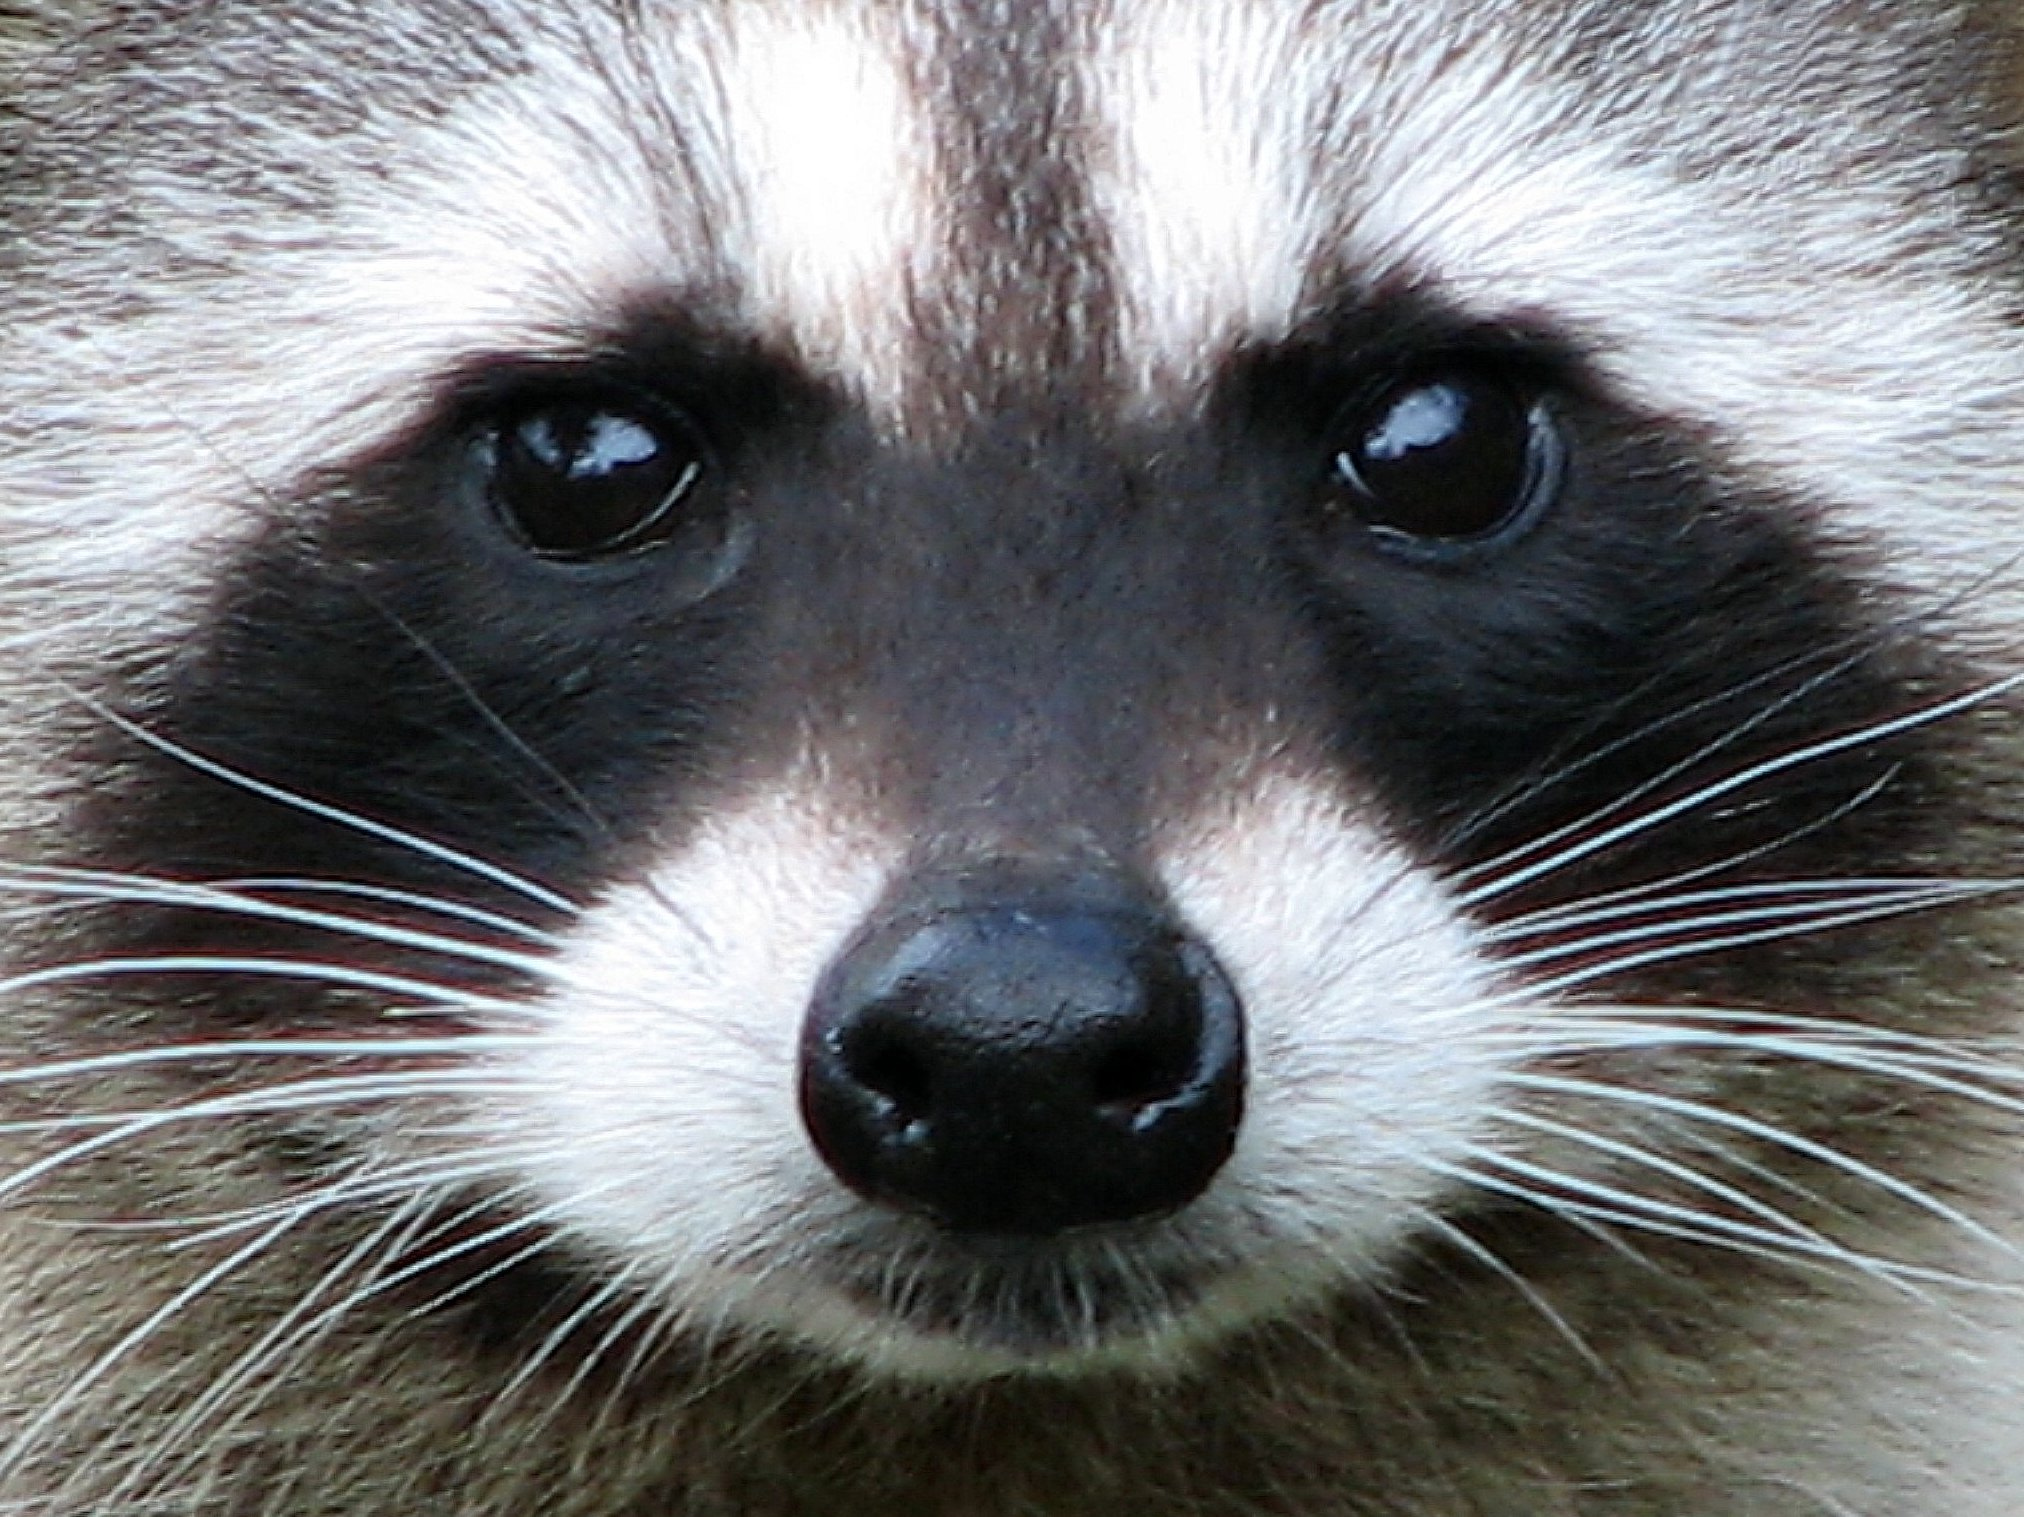 Have you ever suffered with 'raccoon eyes'?